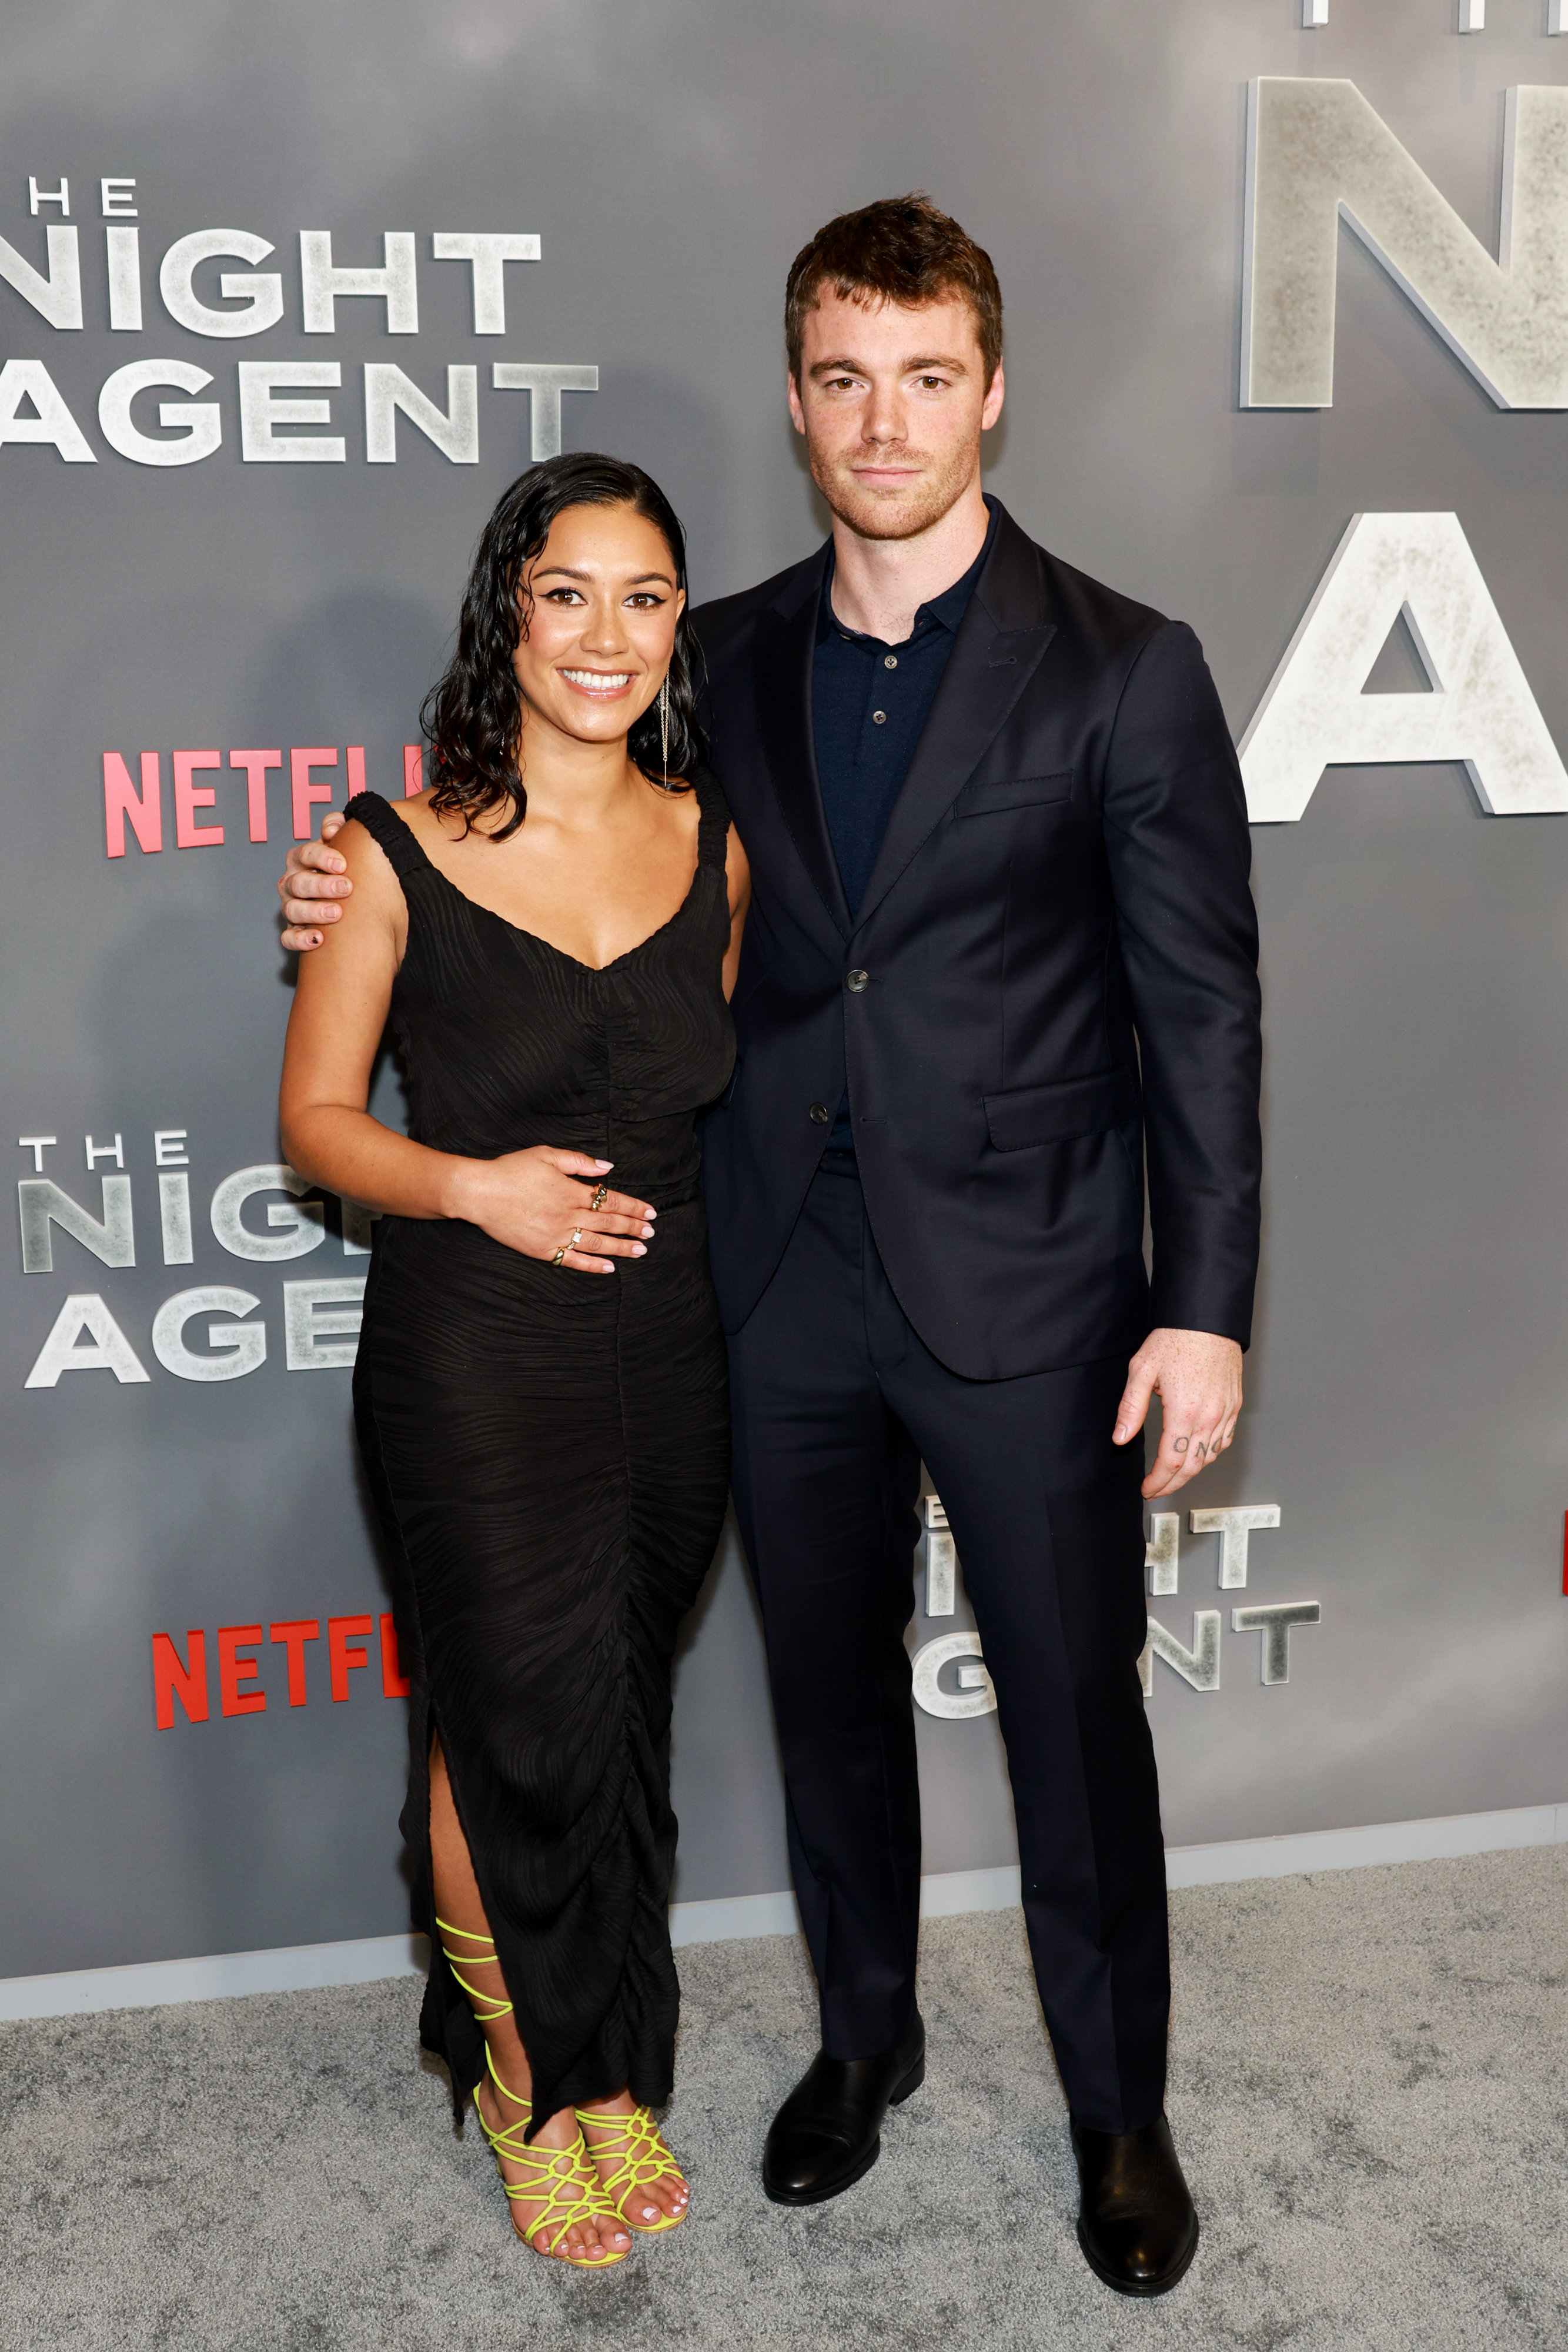 Luciane Buchanan and Gabriel Basso during the Los Angeles premiere of Netflix's "The Night Agent" at TUDUM Theater on March 20, 2023, in Hollywood, California. | Source: Getty Images